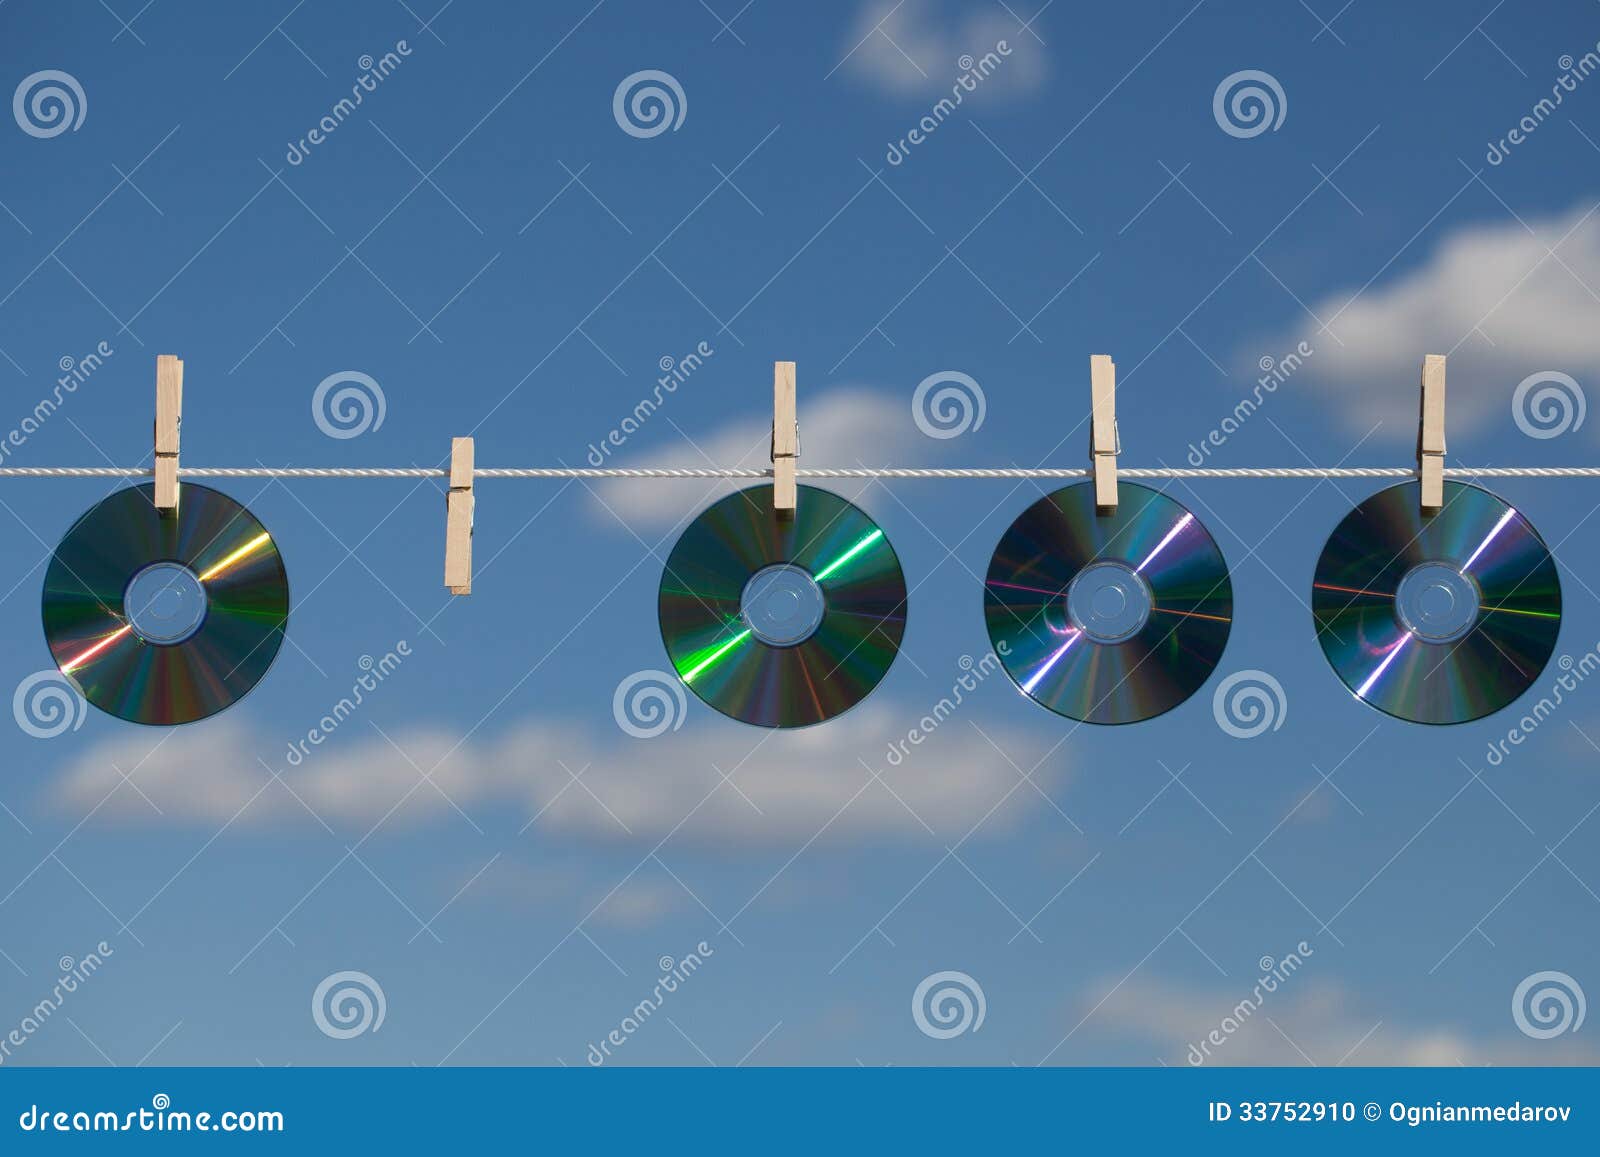 four cds on a clotheslines